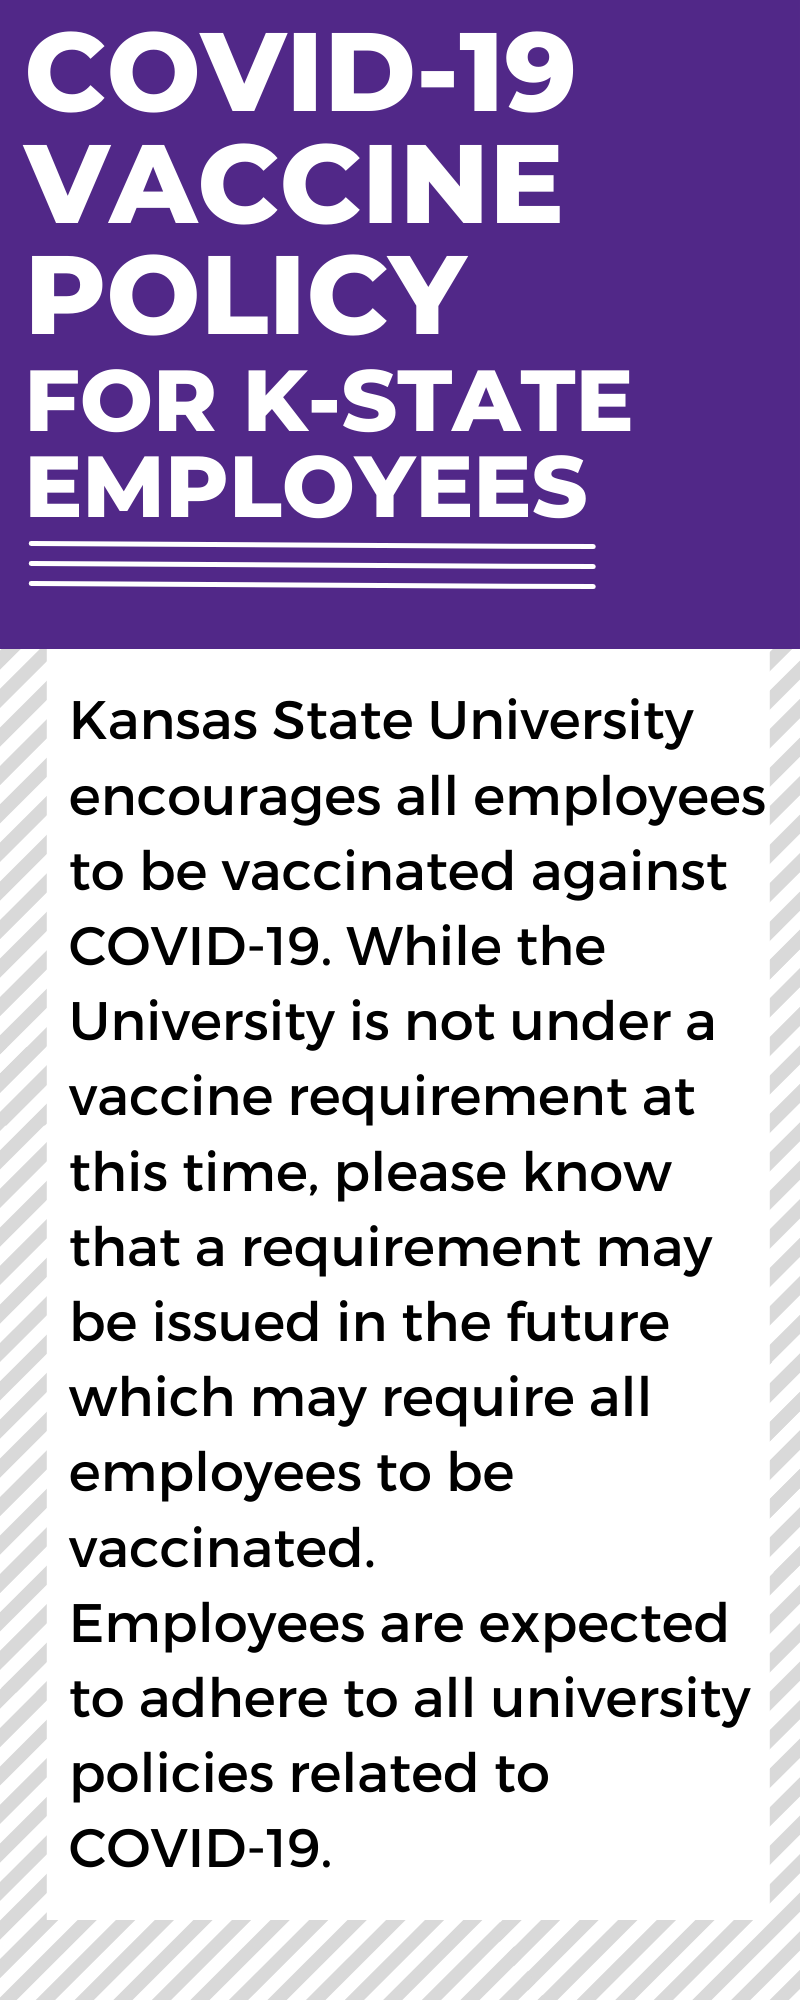 COVID-19 Vaccine Policy for K-State Employees: Kansas State University encourages all employees to be vaccinated against COVID-19.  While the University is not under a vaccine requirement at this time, please know that a requirement may be issued in the future which may require all employees to be vaccinated.  Employees are expected to adhere to all university policies related to COVID-19.